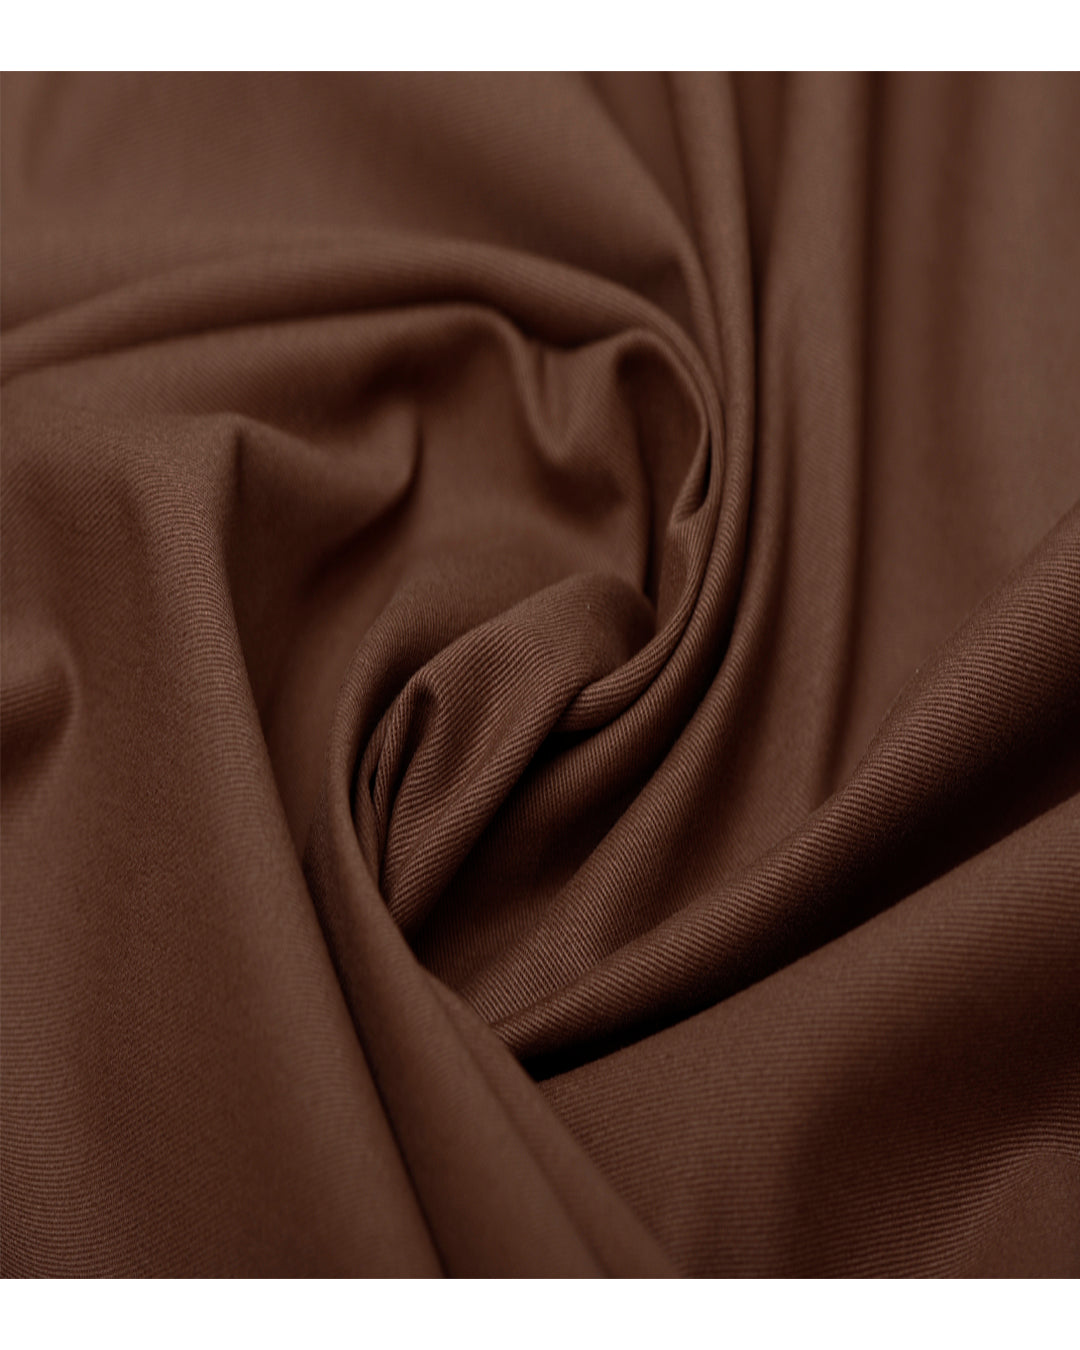 Closeup view of custom Genoa Chino pants for men by Luxire in chestnut brown